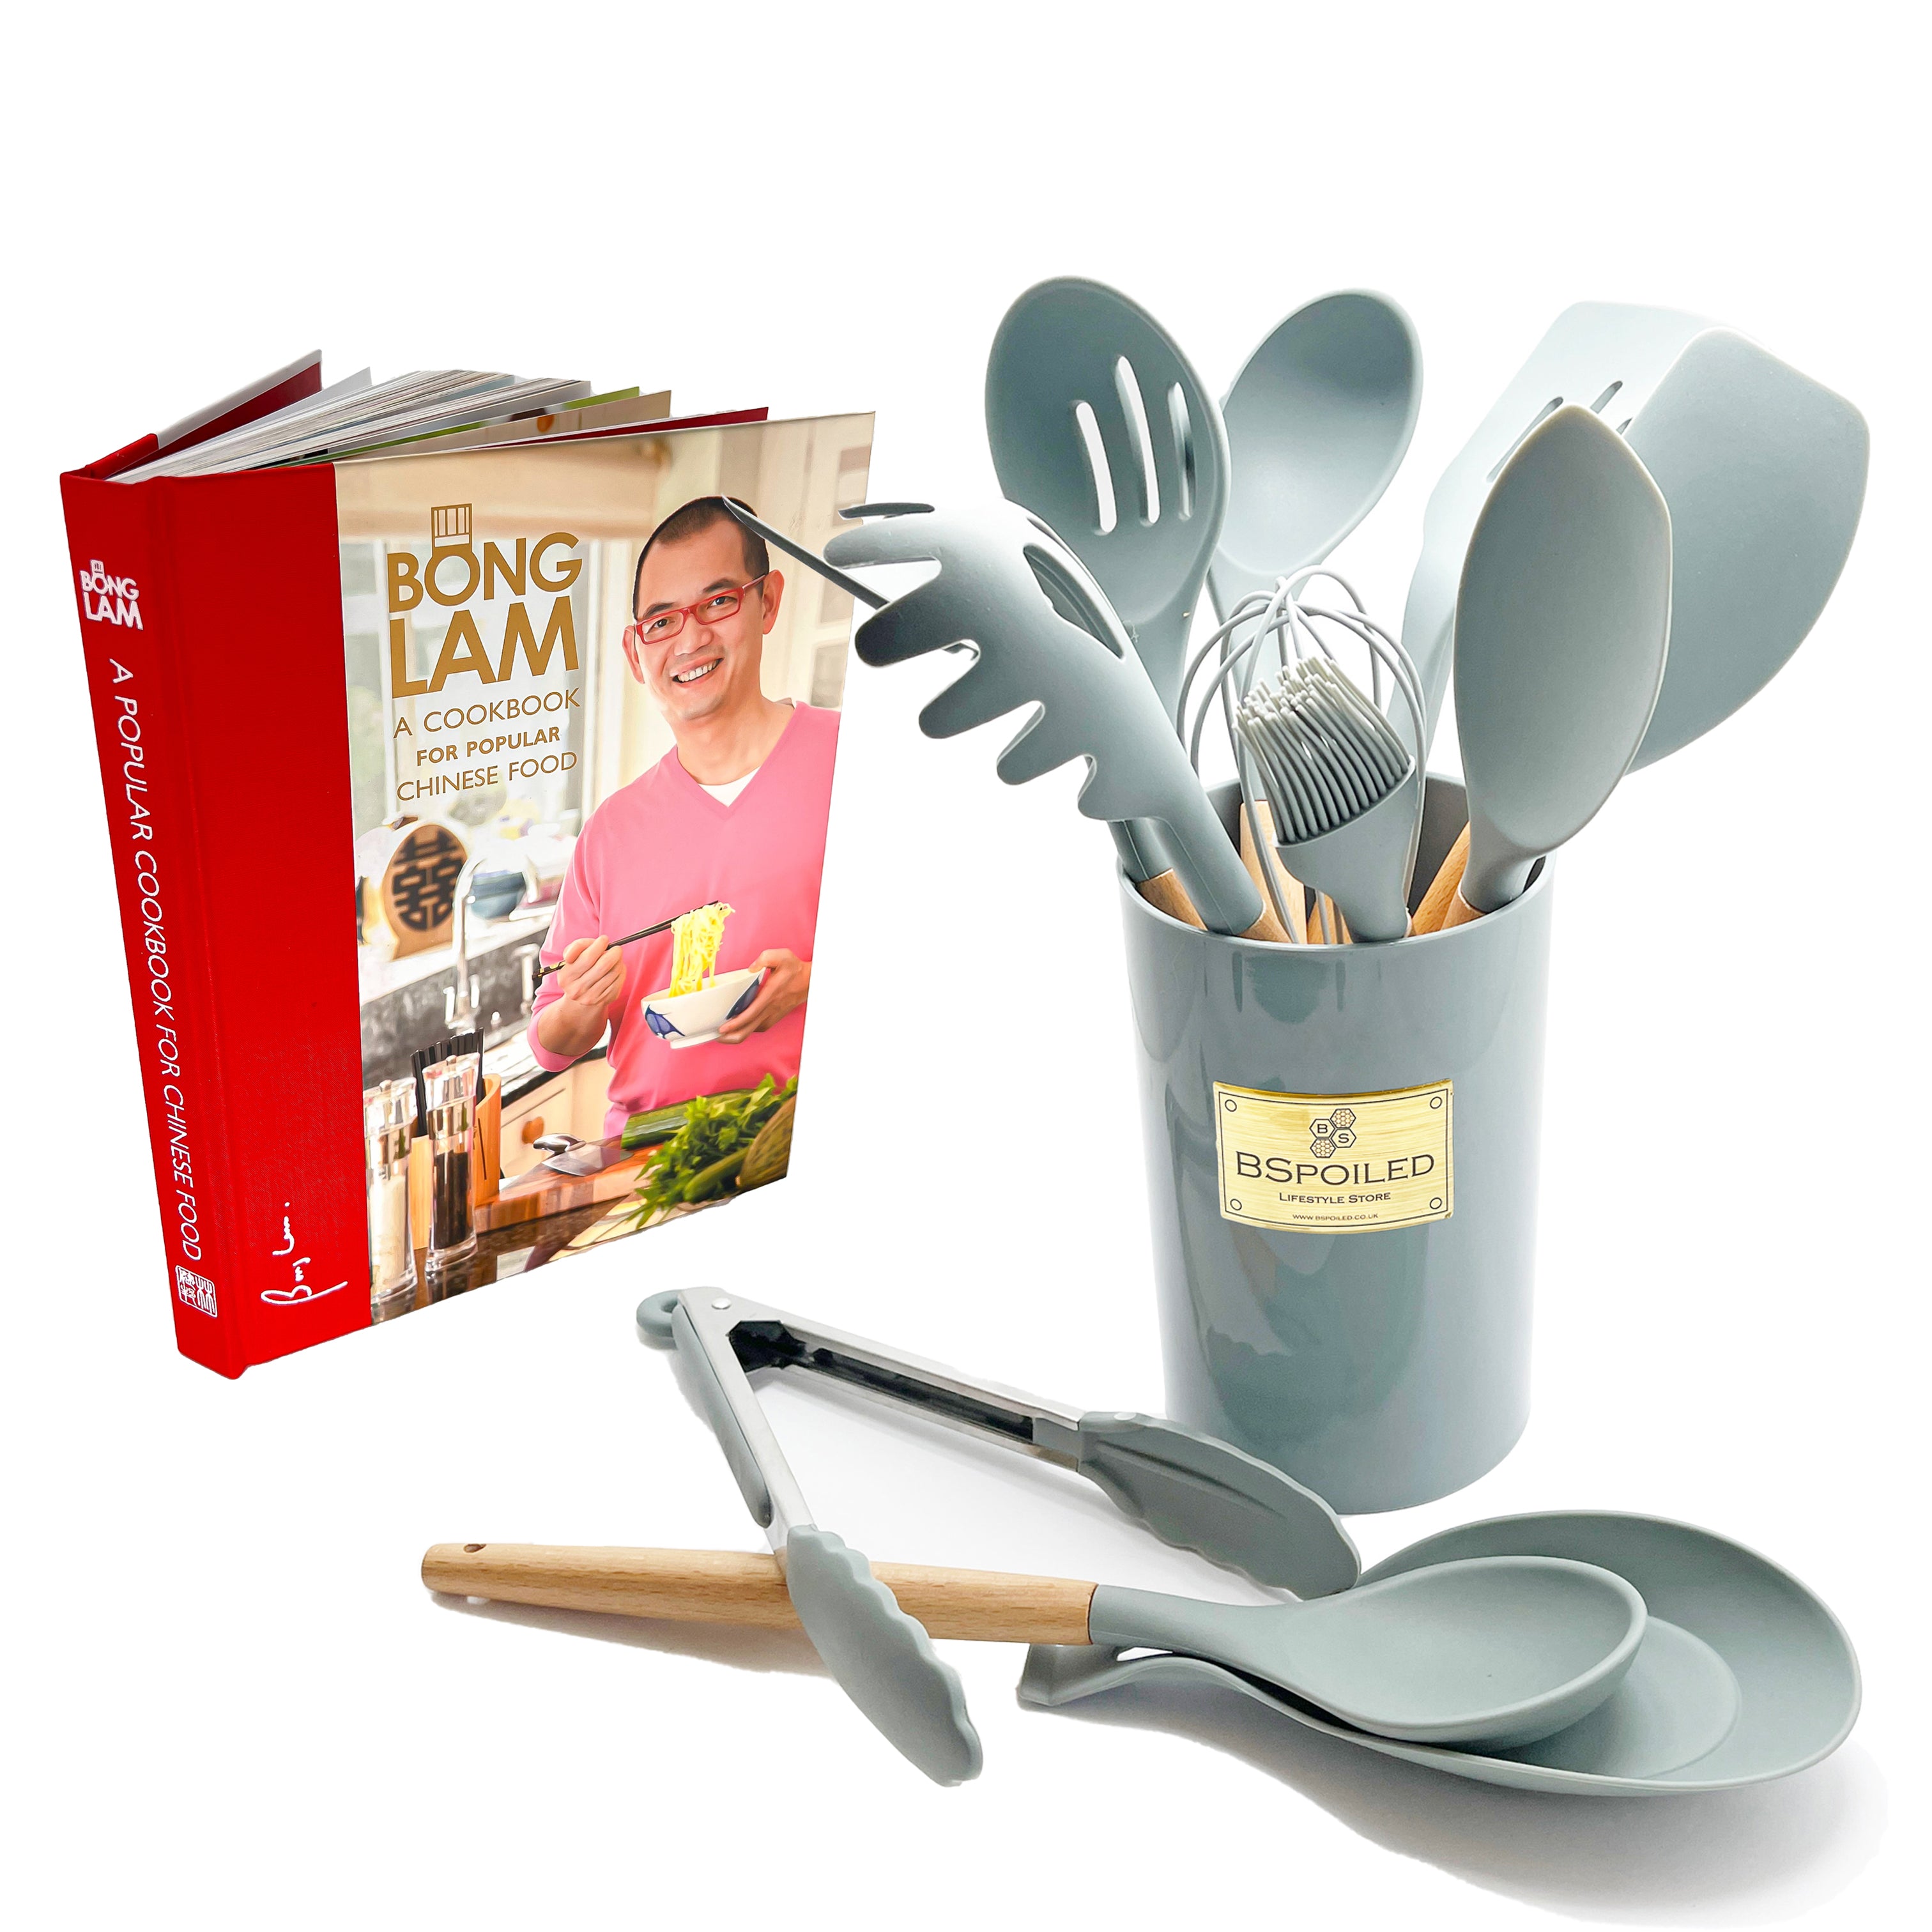 cooking utensils and cook book